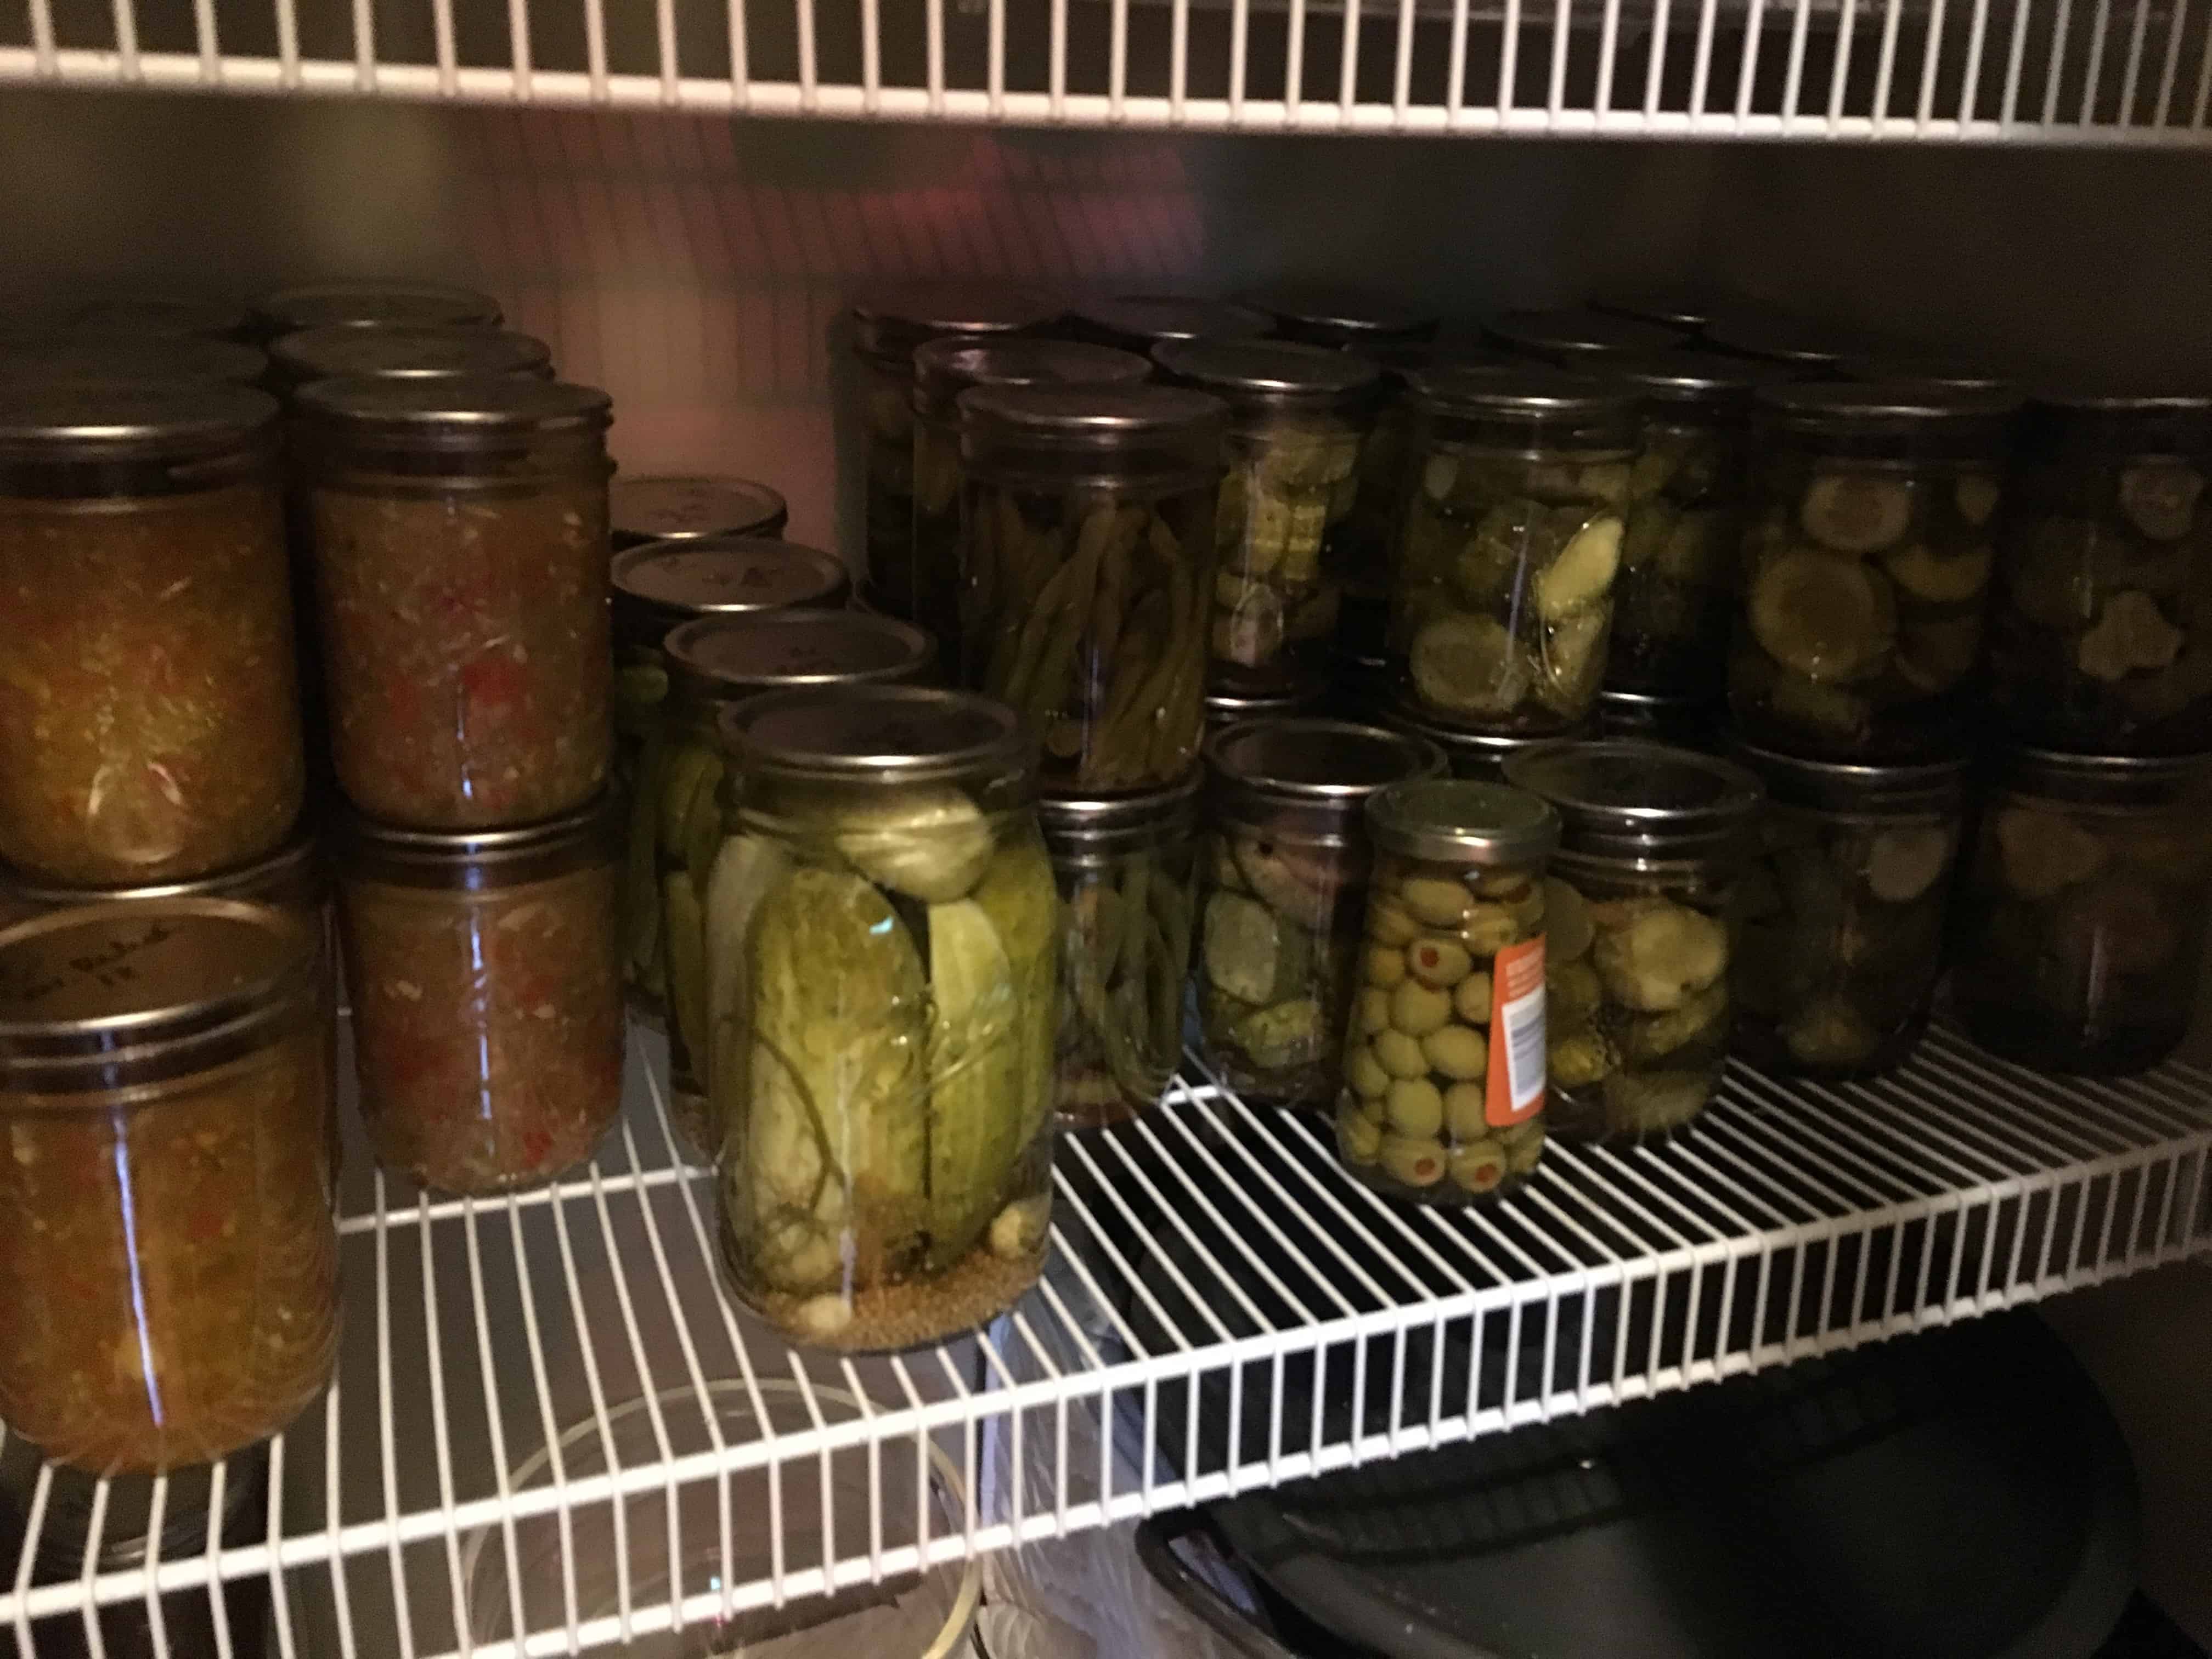 Jars of home canned pickles from zero waste vegan pantry https://trimazing.com